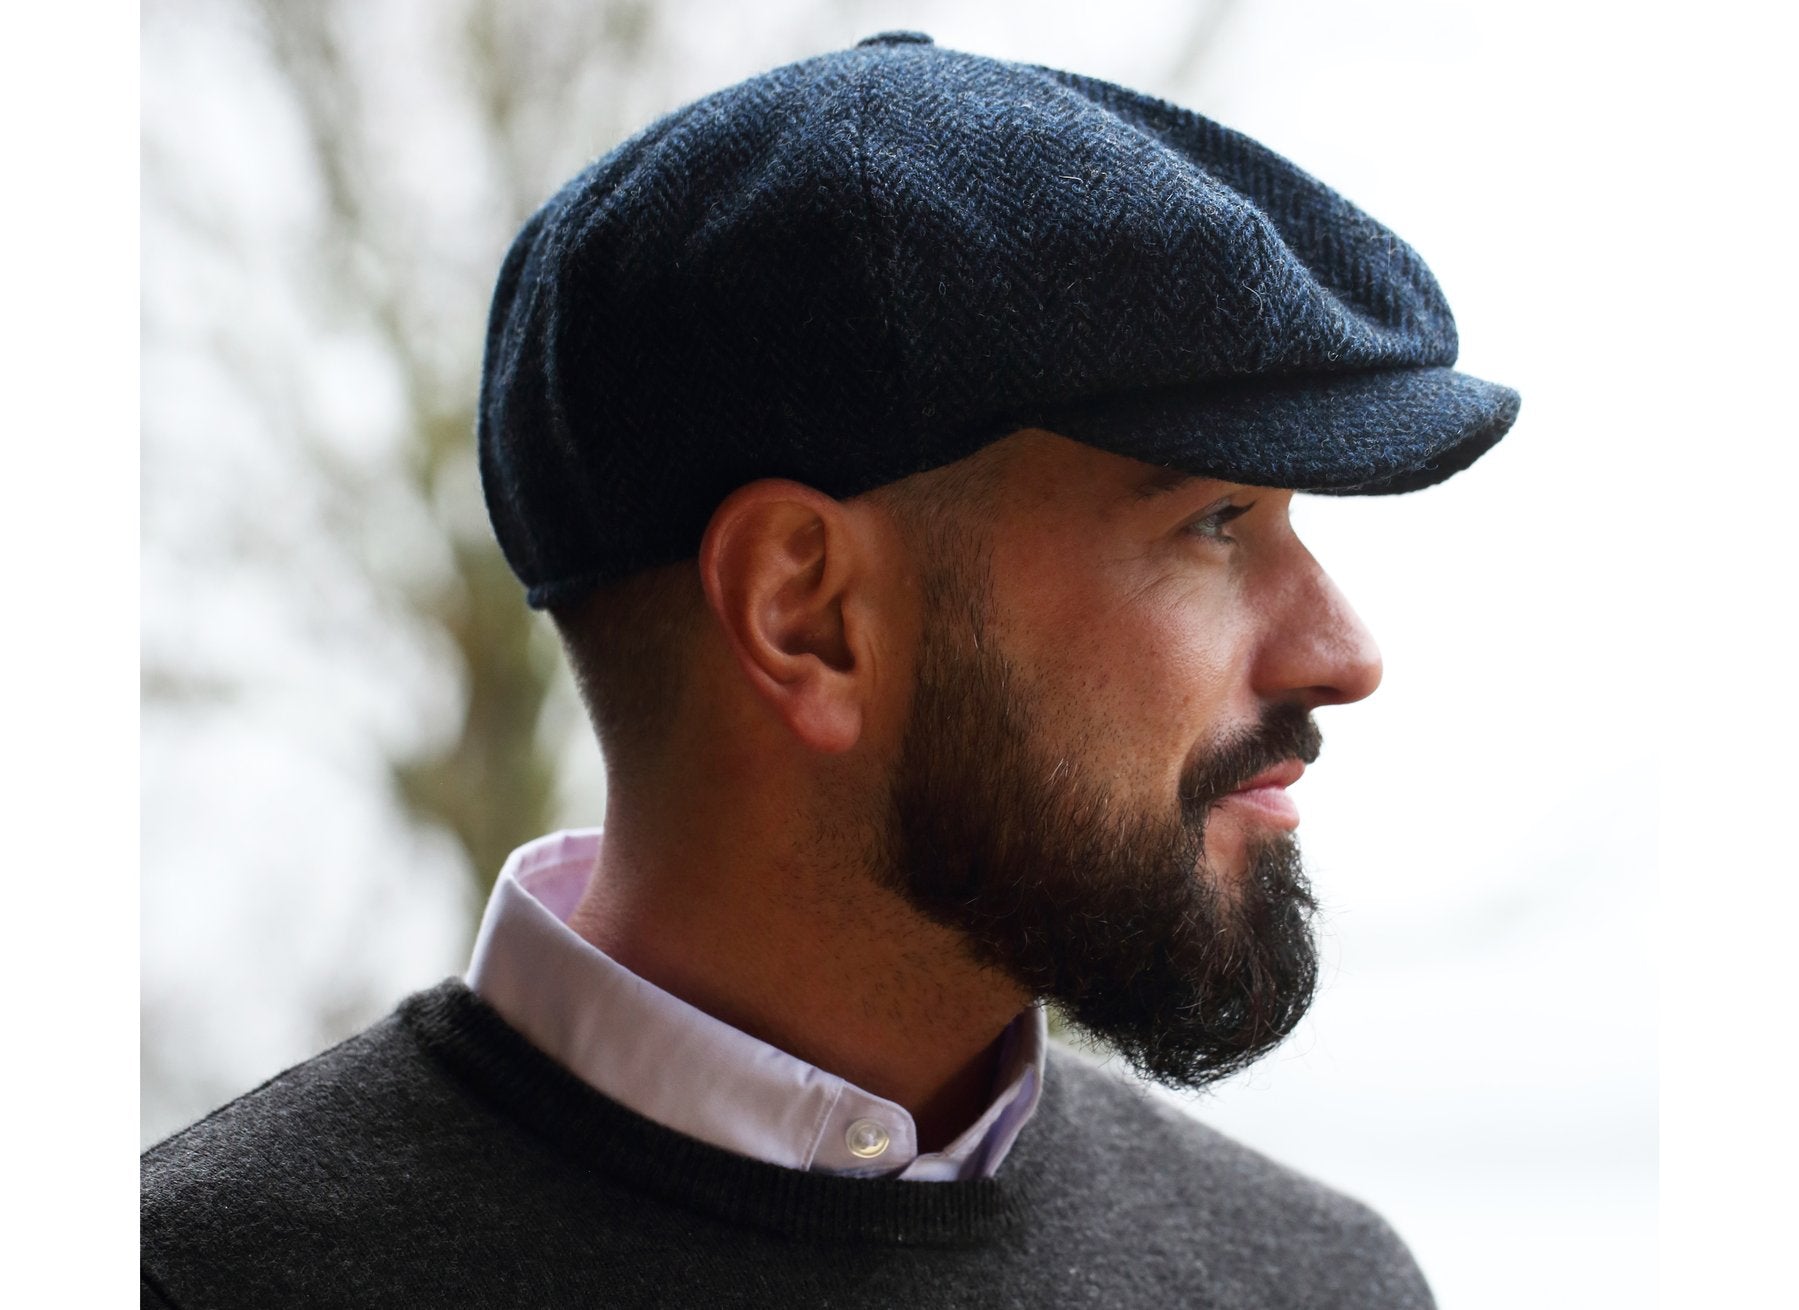 Man wearing a Blue and Black Herringbone Donegal Tweed Peaky Blinders Style Cap by Hanna Hats of Donegal.